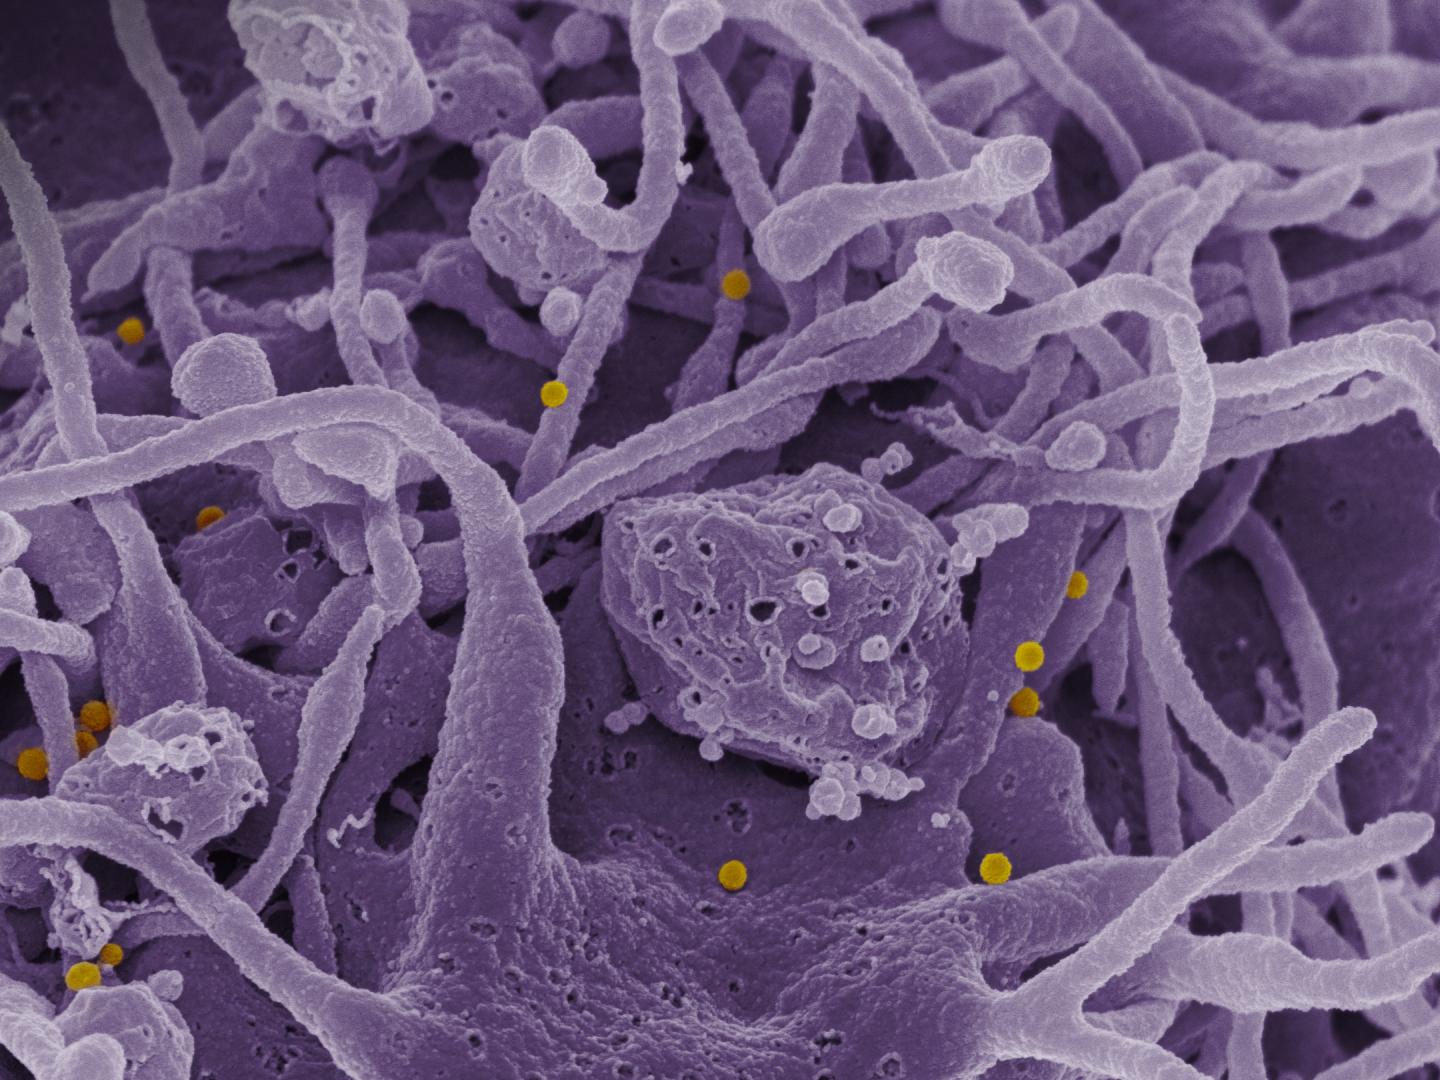 Scanning Electron Micrographs of CCHF Viral Particles